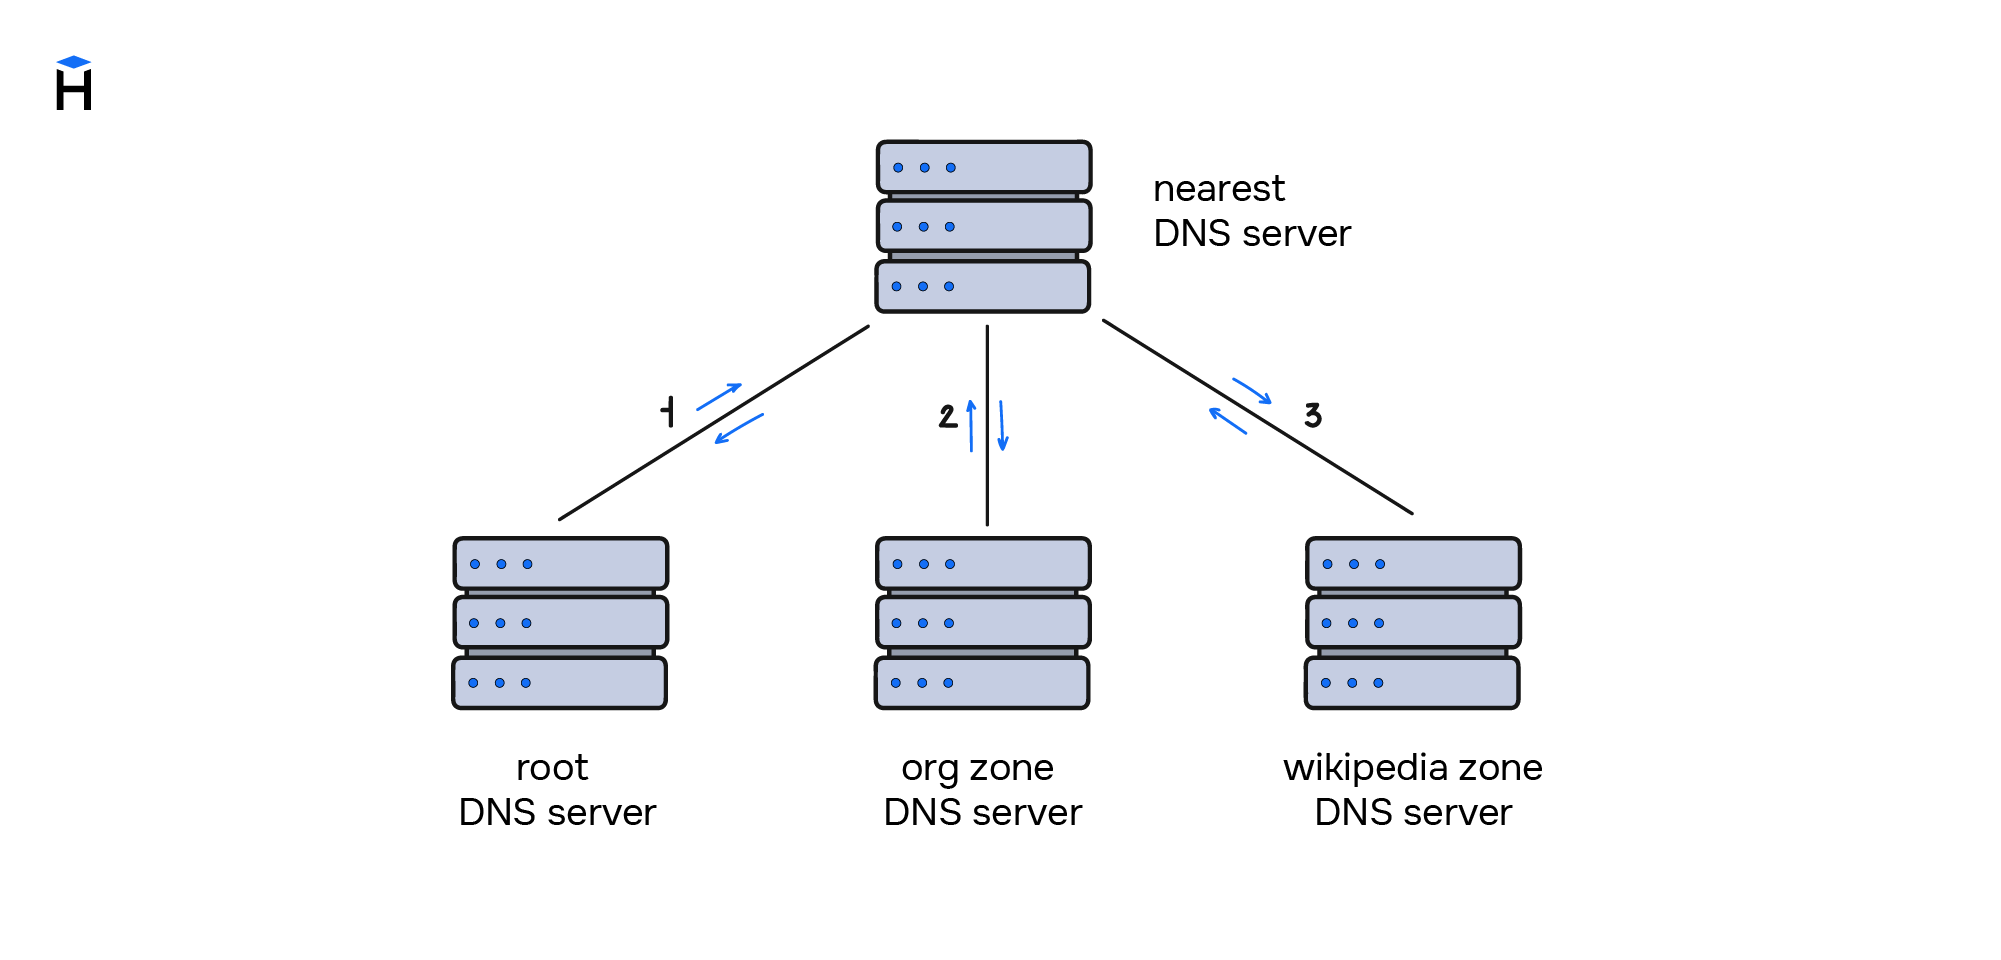 What's a DNS server in simple words?